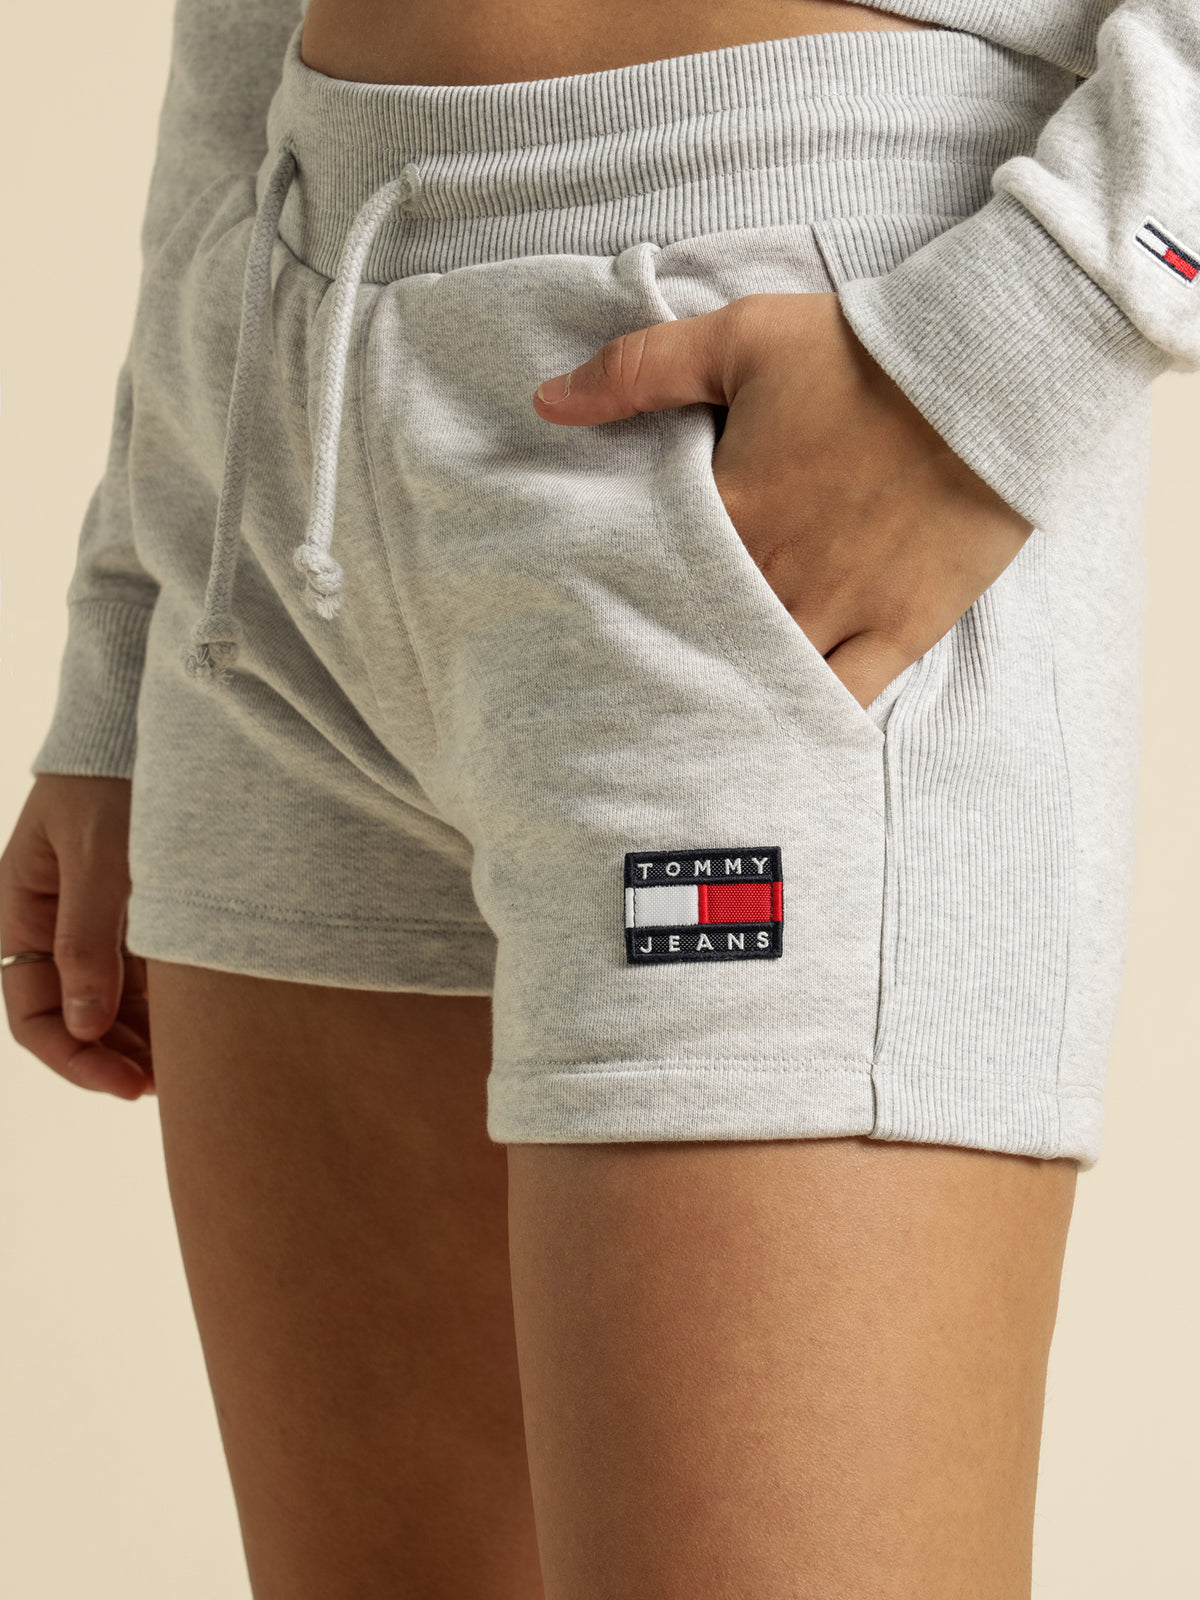 Tommy Badge Shorts in Silver Grey